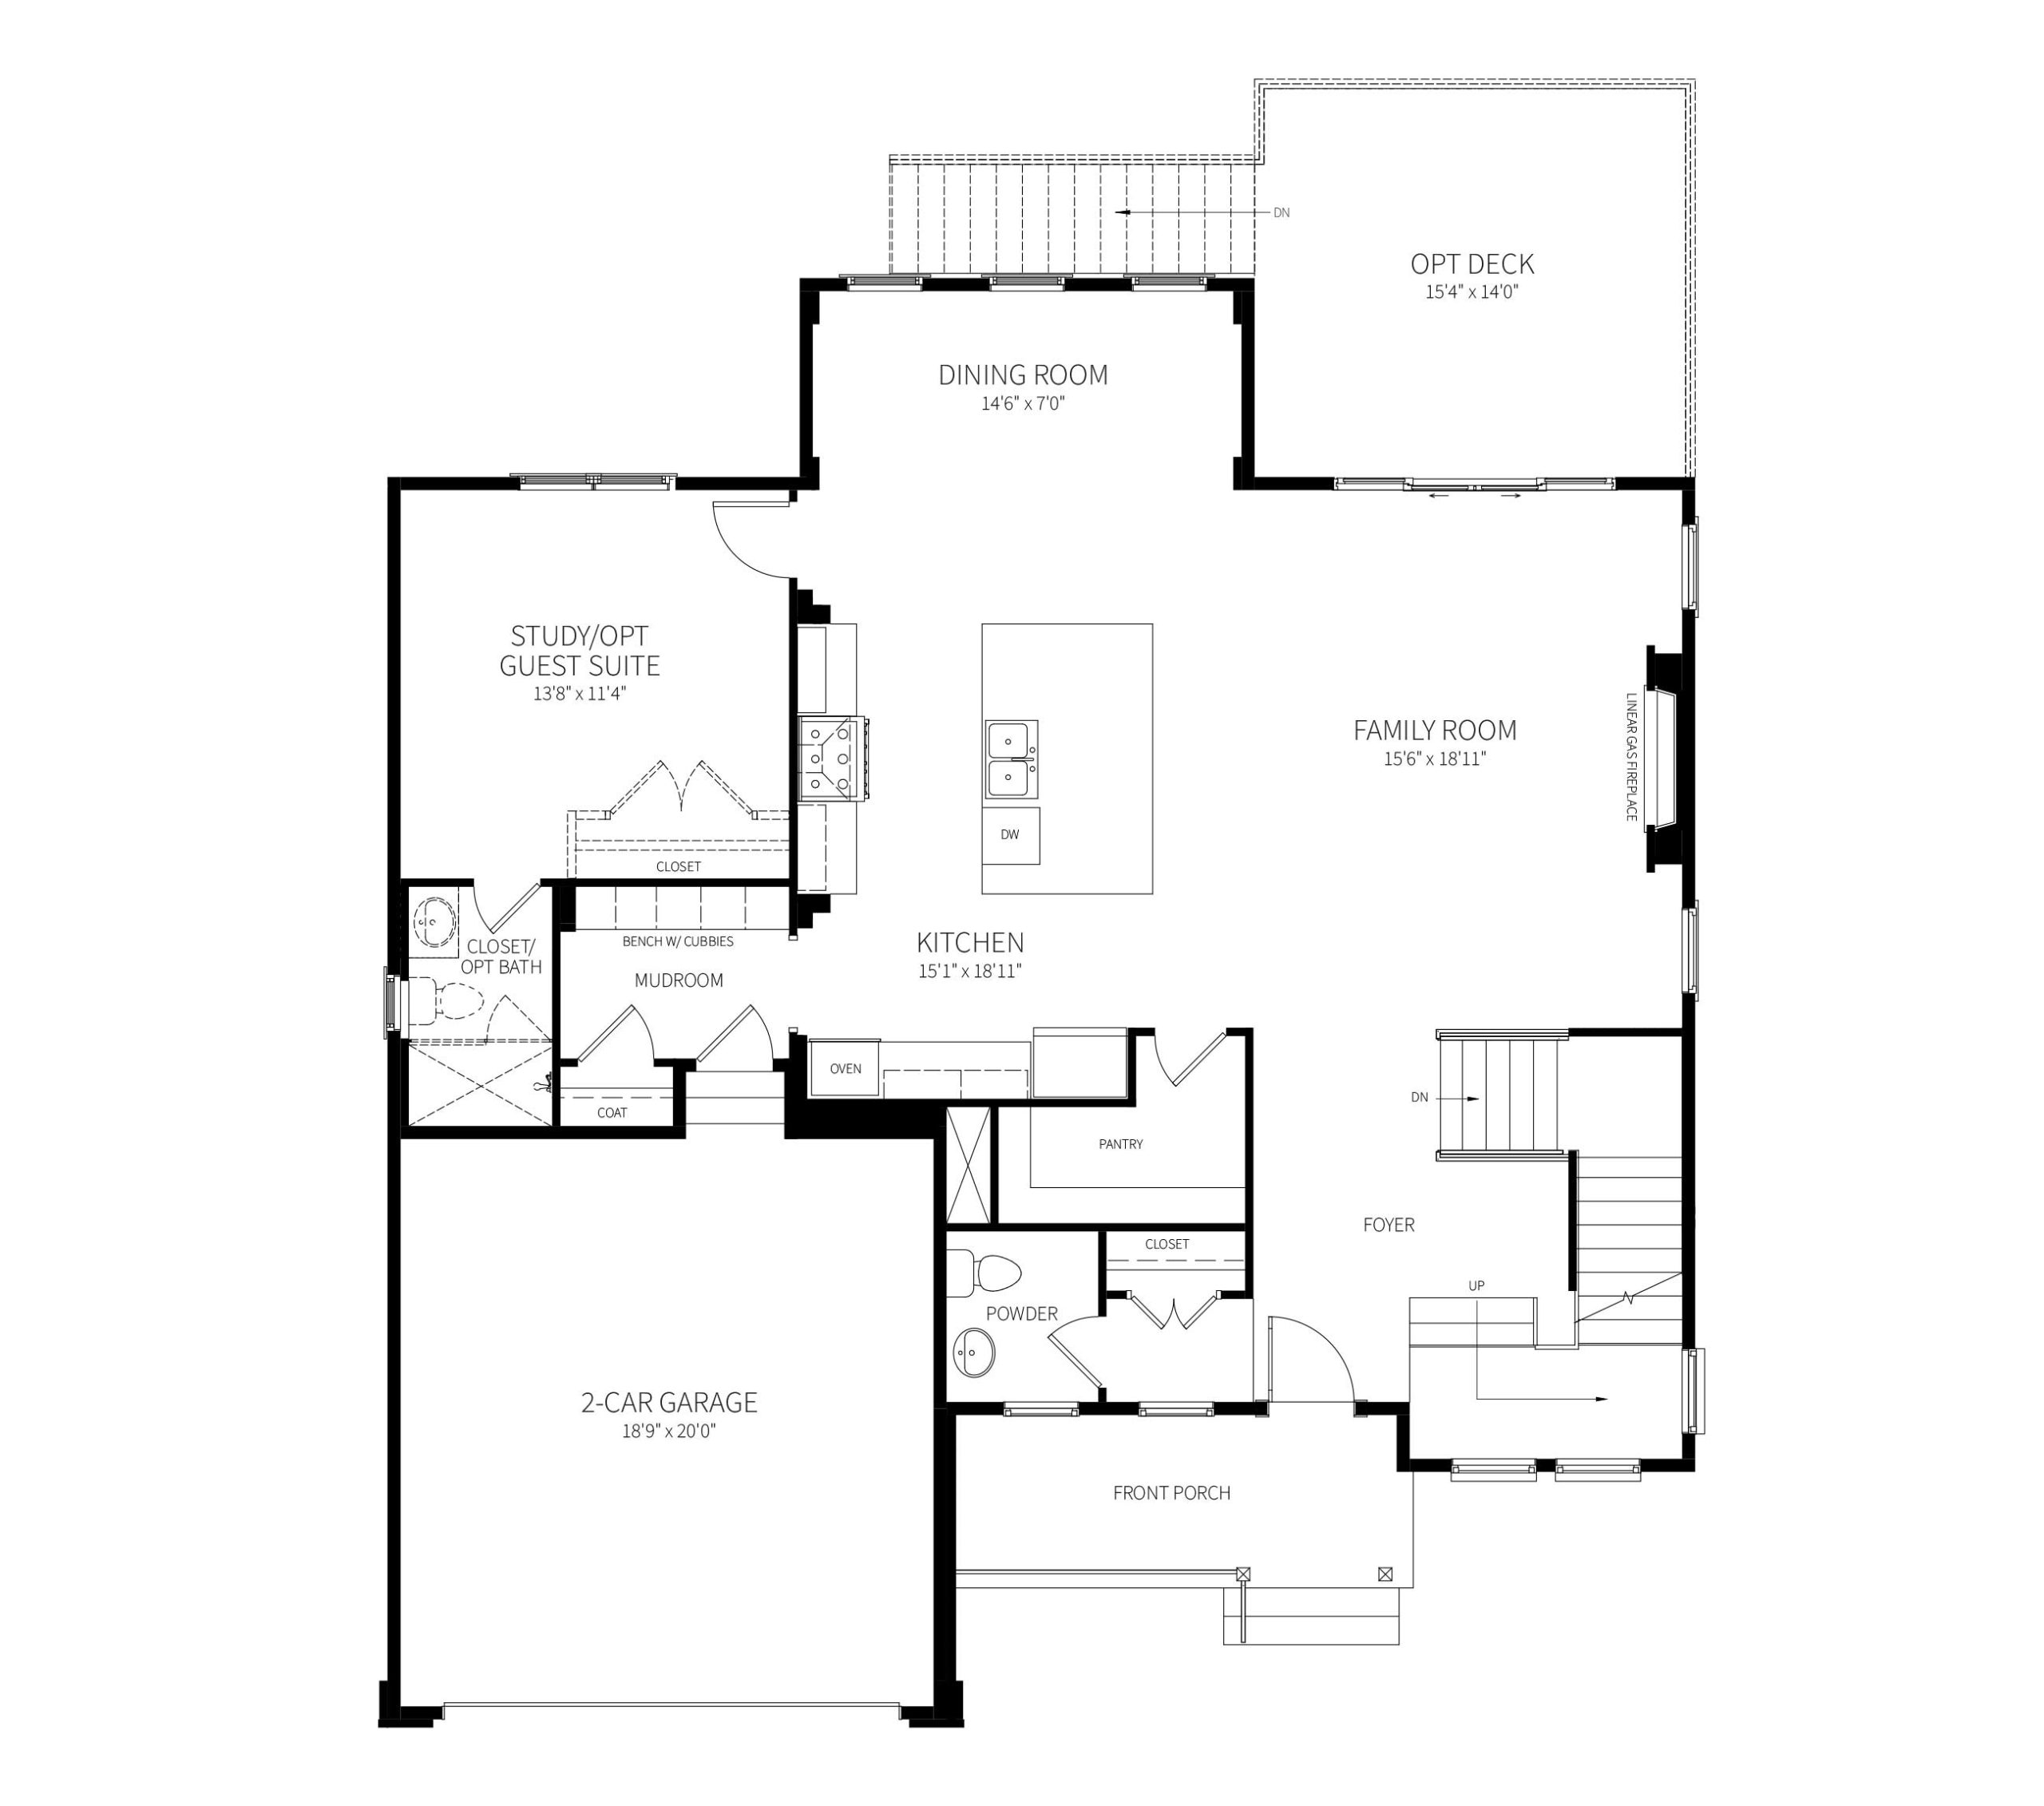 The Bradley first floor plan featuring a Guest Suite with Bath, and expansive Family Room, Kitchen and Dining Room Area.